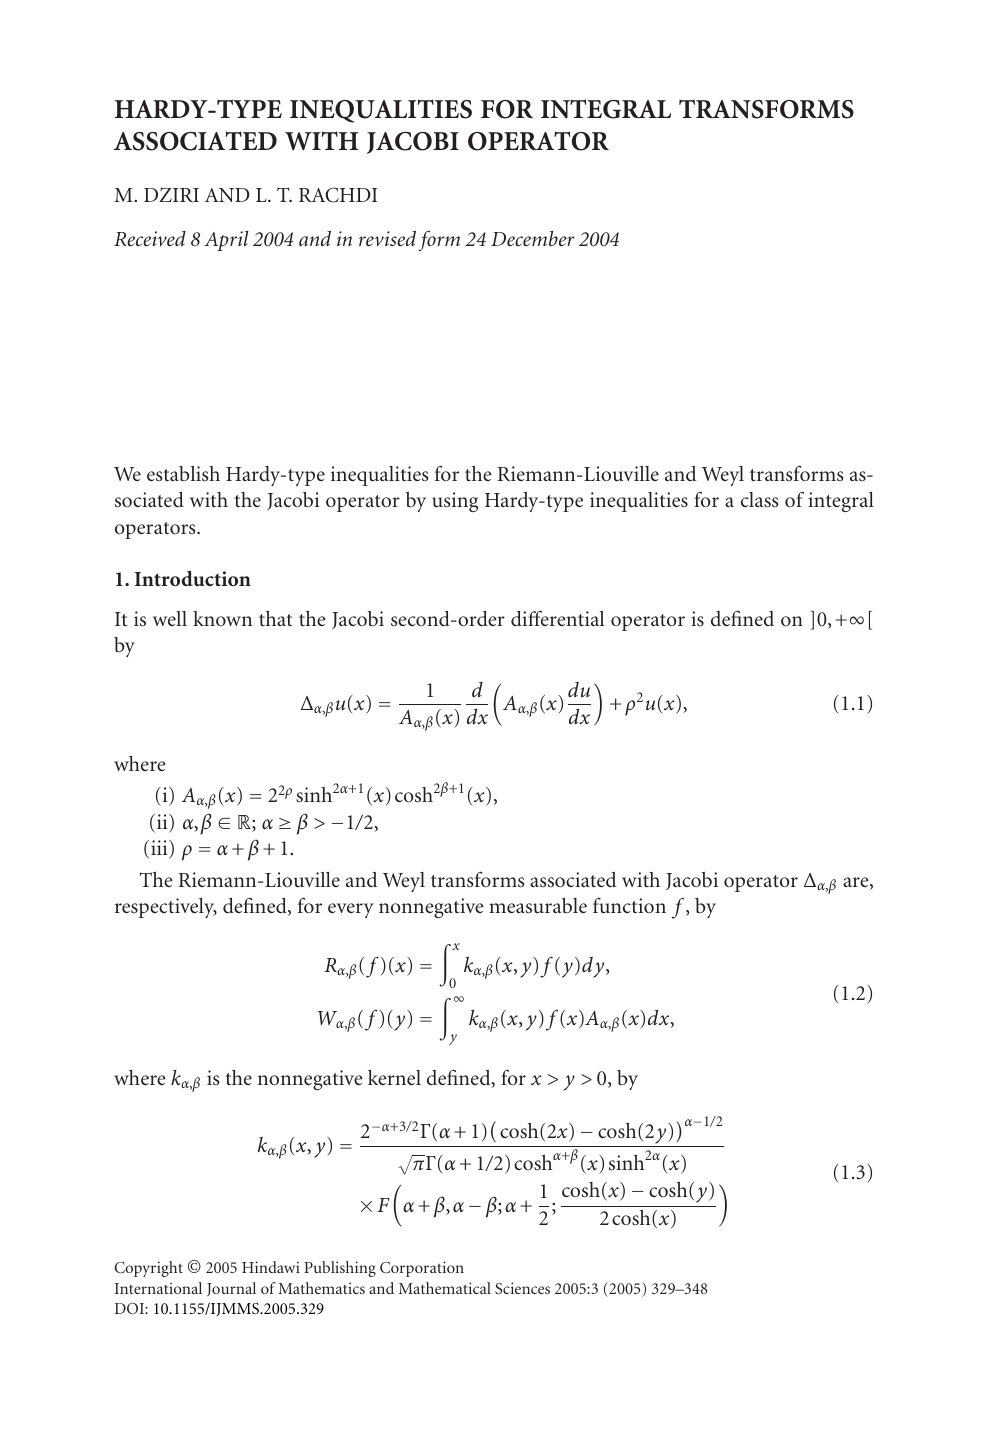 Hardy Type Inequalities For Integral Transforms Associated With Jacobi Operator Topic Of Research Paper In Mathematics Download Scholarly Article Pdf And Read For Free On Cyberleninka Open Science Hub